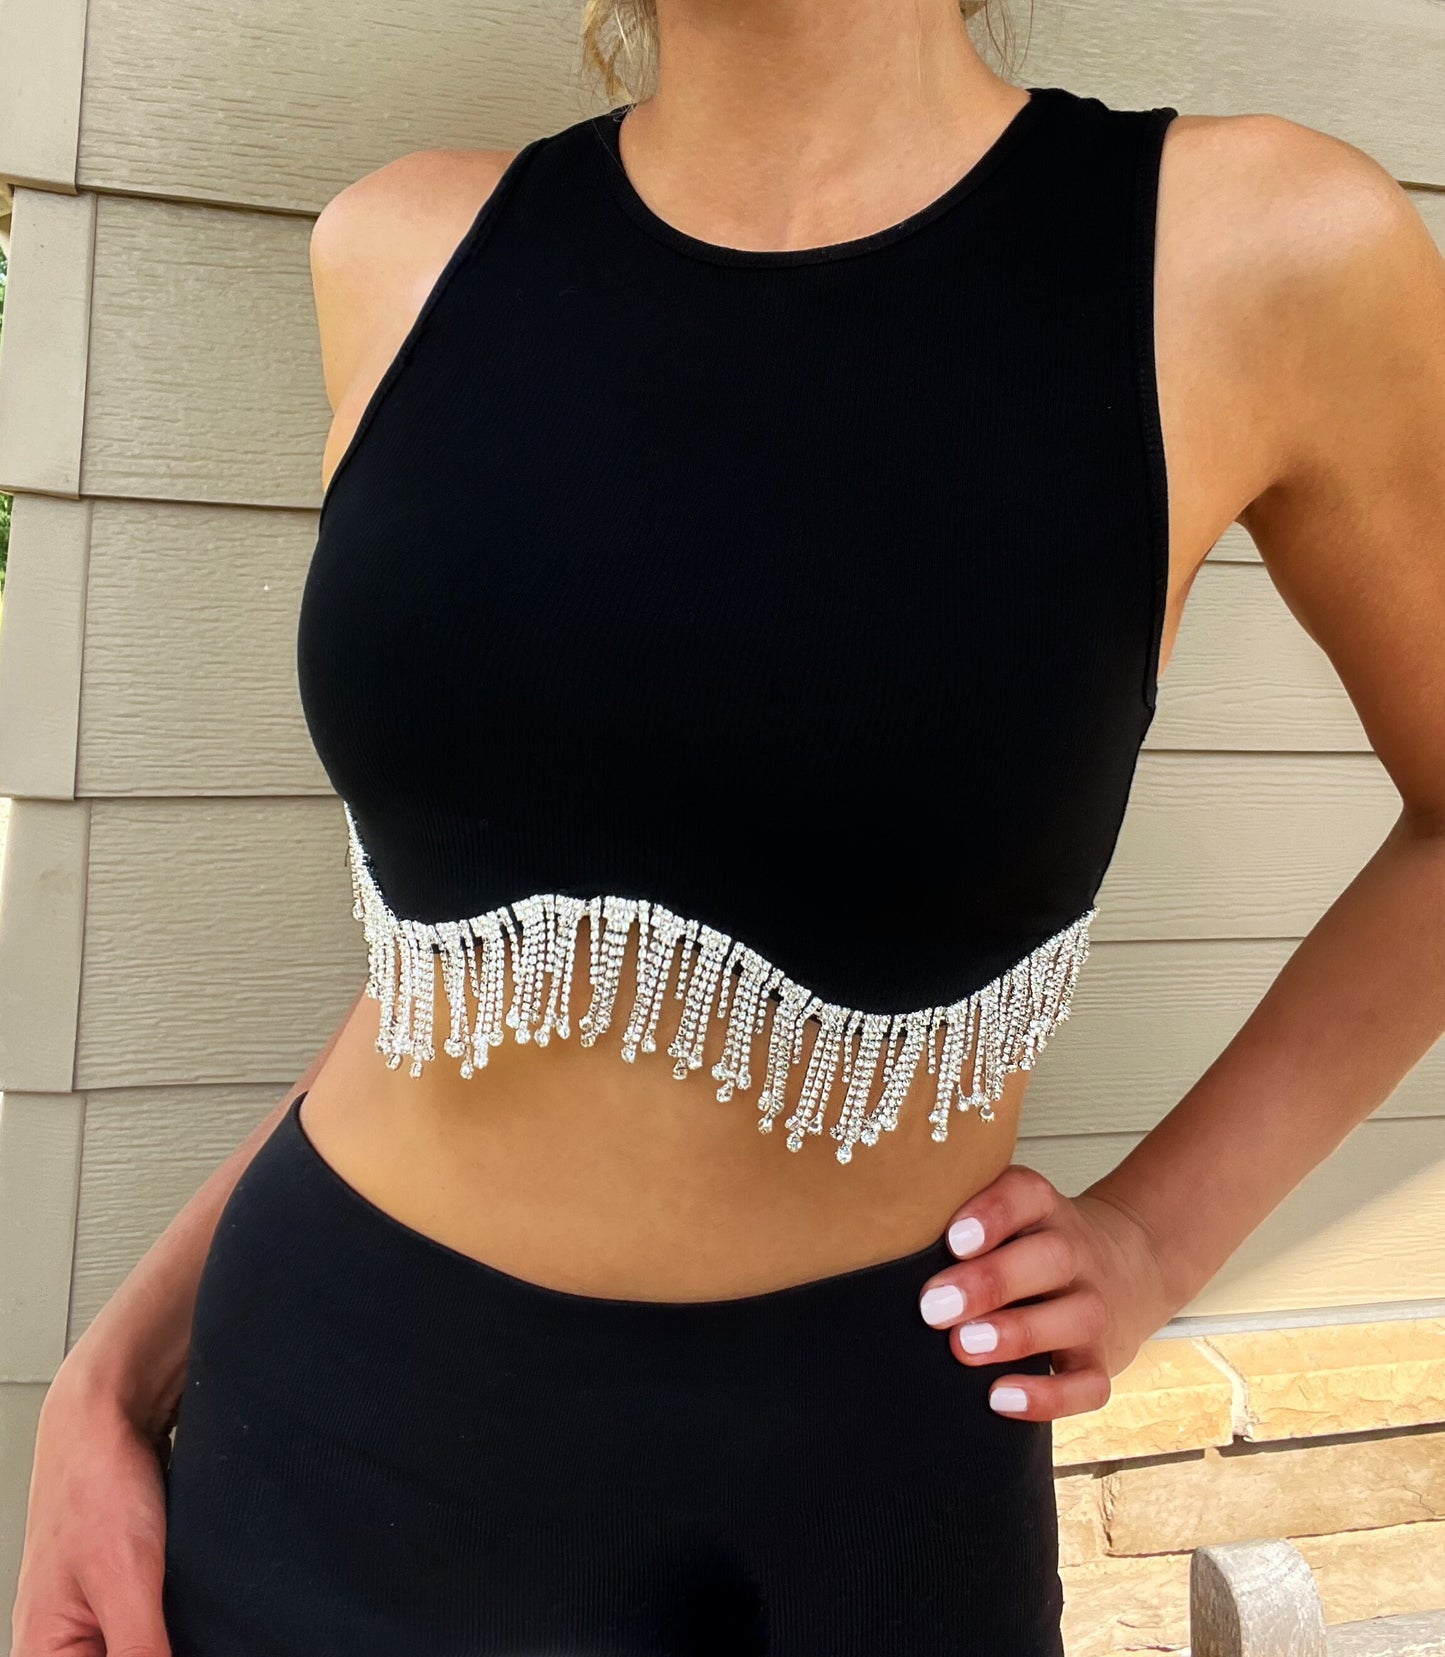 Rhinestone crop top, Fringe Crop Top, Bachelorette Party outfit, bachelorette party shirts space cowgirl bachelorette, Bridal halter top,